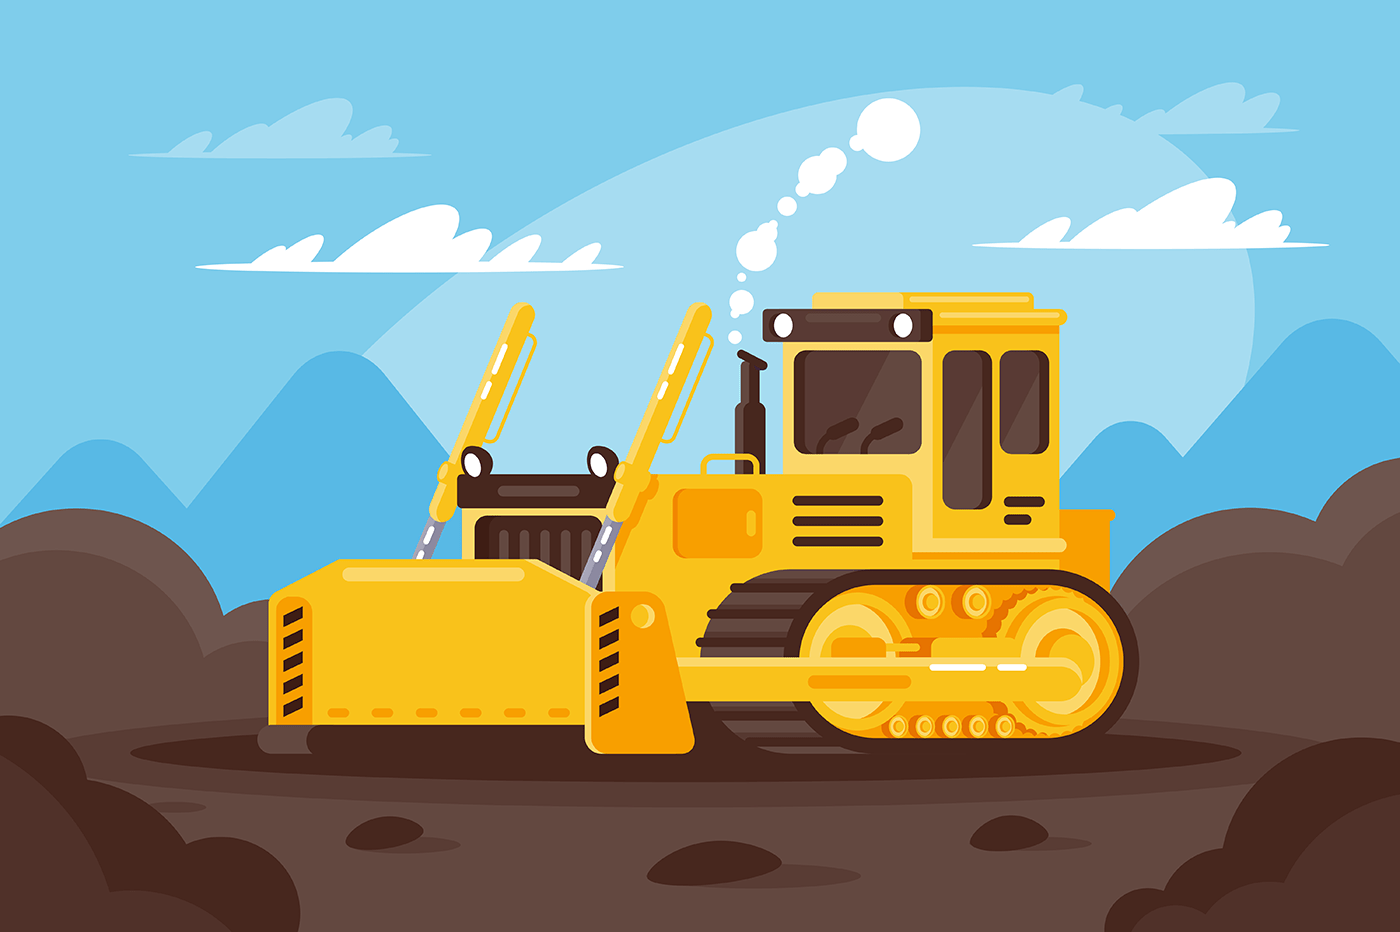 Bulldozer at a construction site surrounded by land.